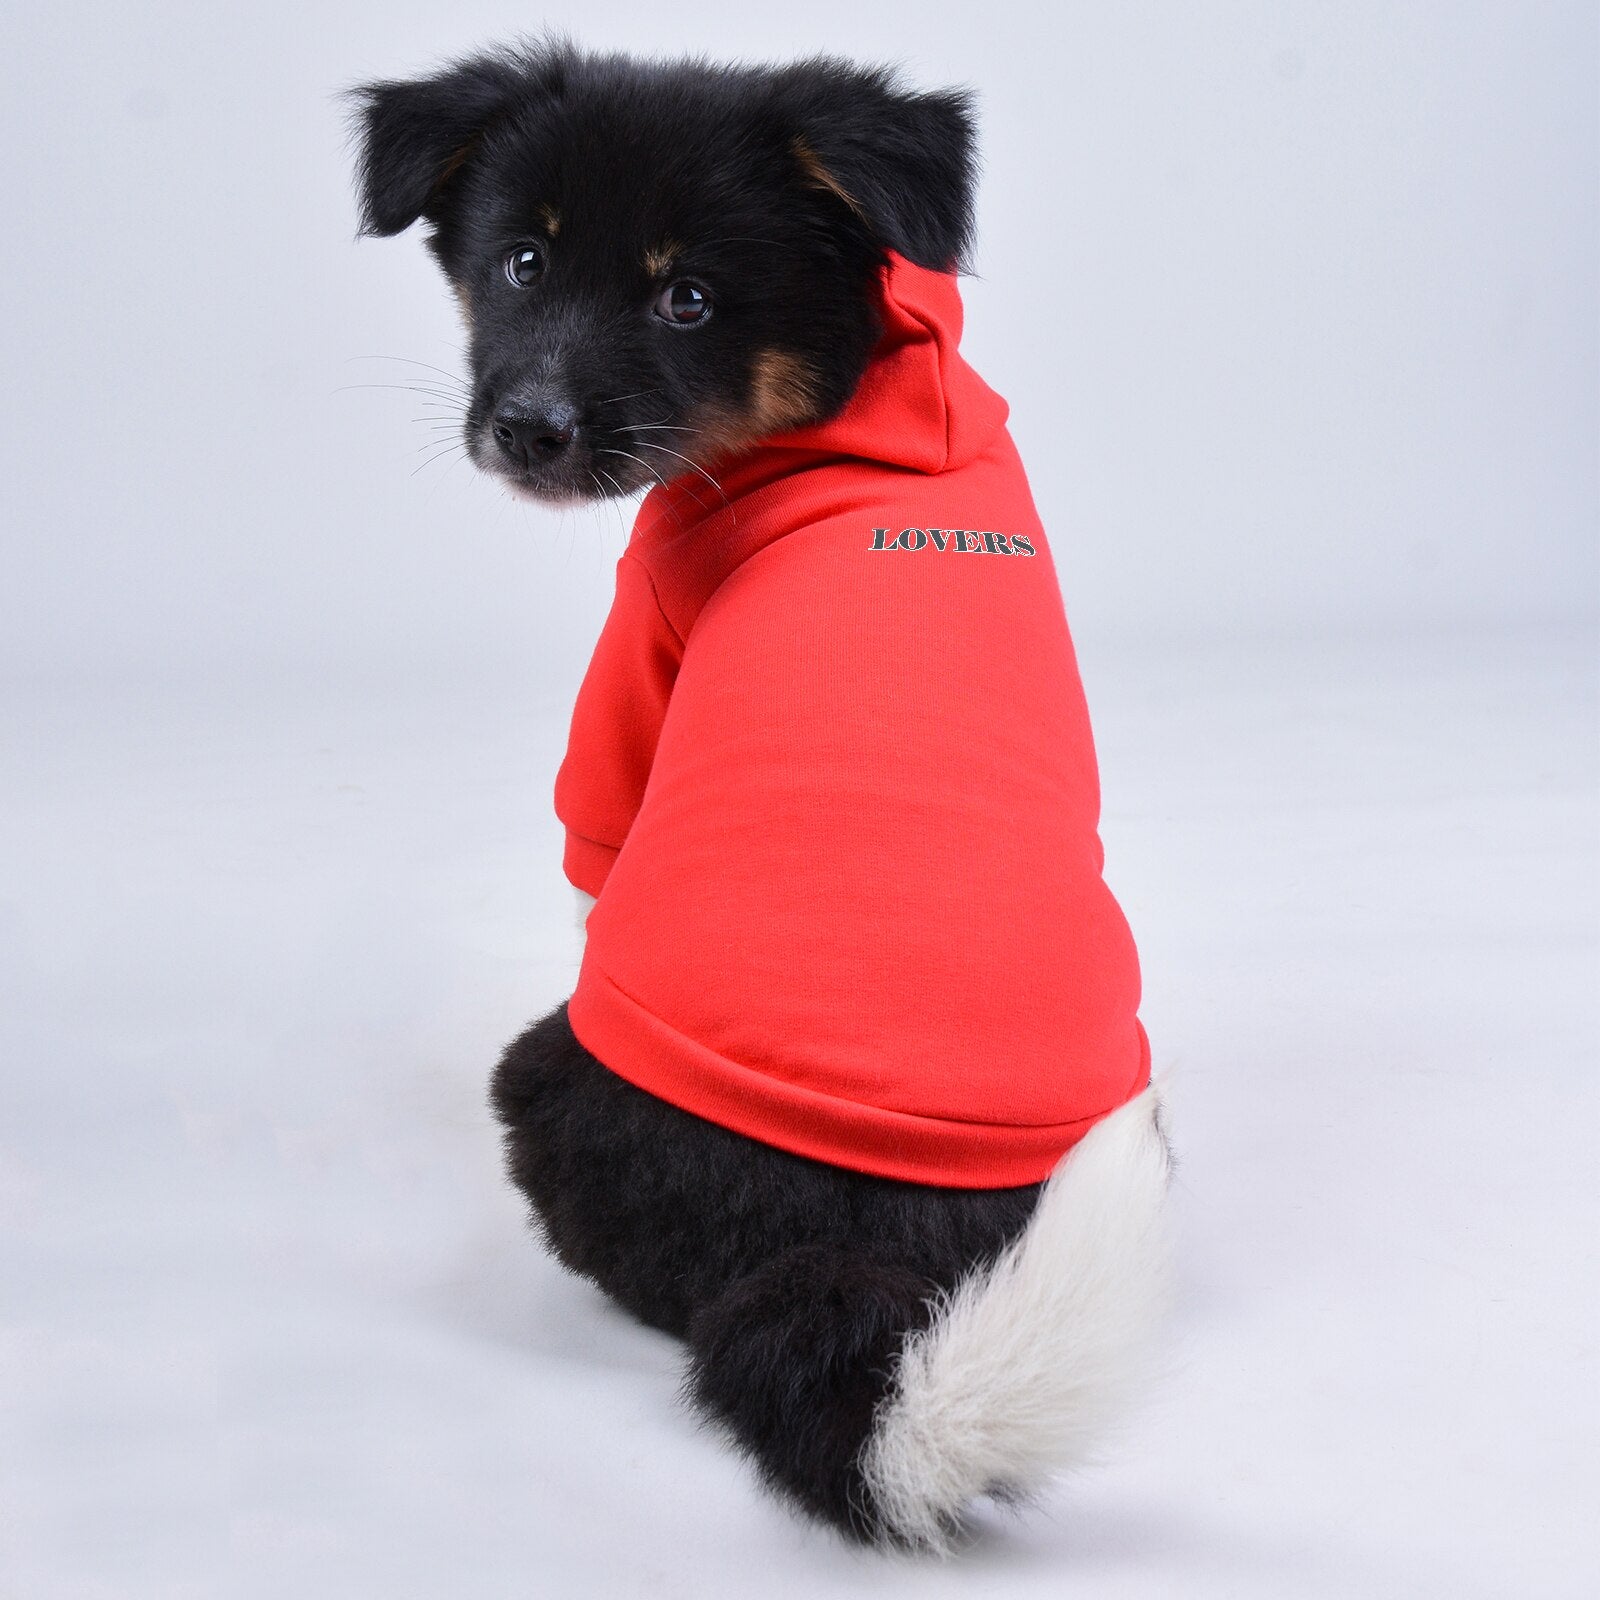 Pet Clothes Hoodie Letter Printed with Leash Hole, Soft and Breathable Fabric and Cool Cute Design